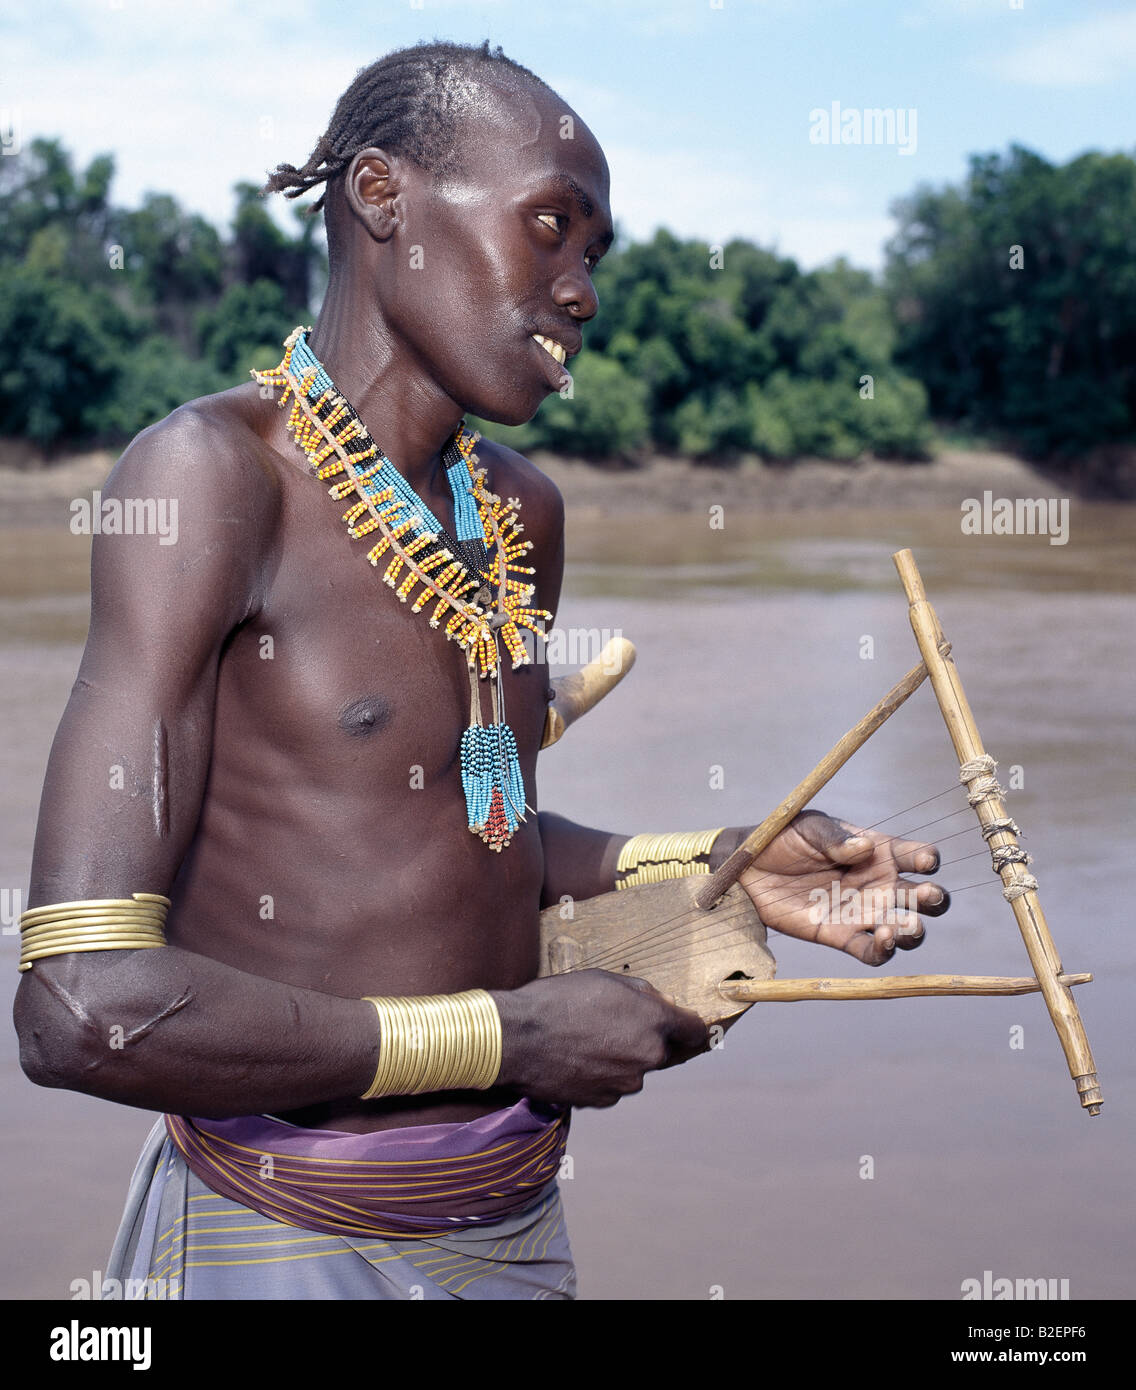 A Karo man with braided hair plays a traditional stringed instrument beside the Omo River near Duss. Stock Photo